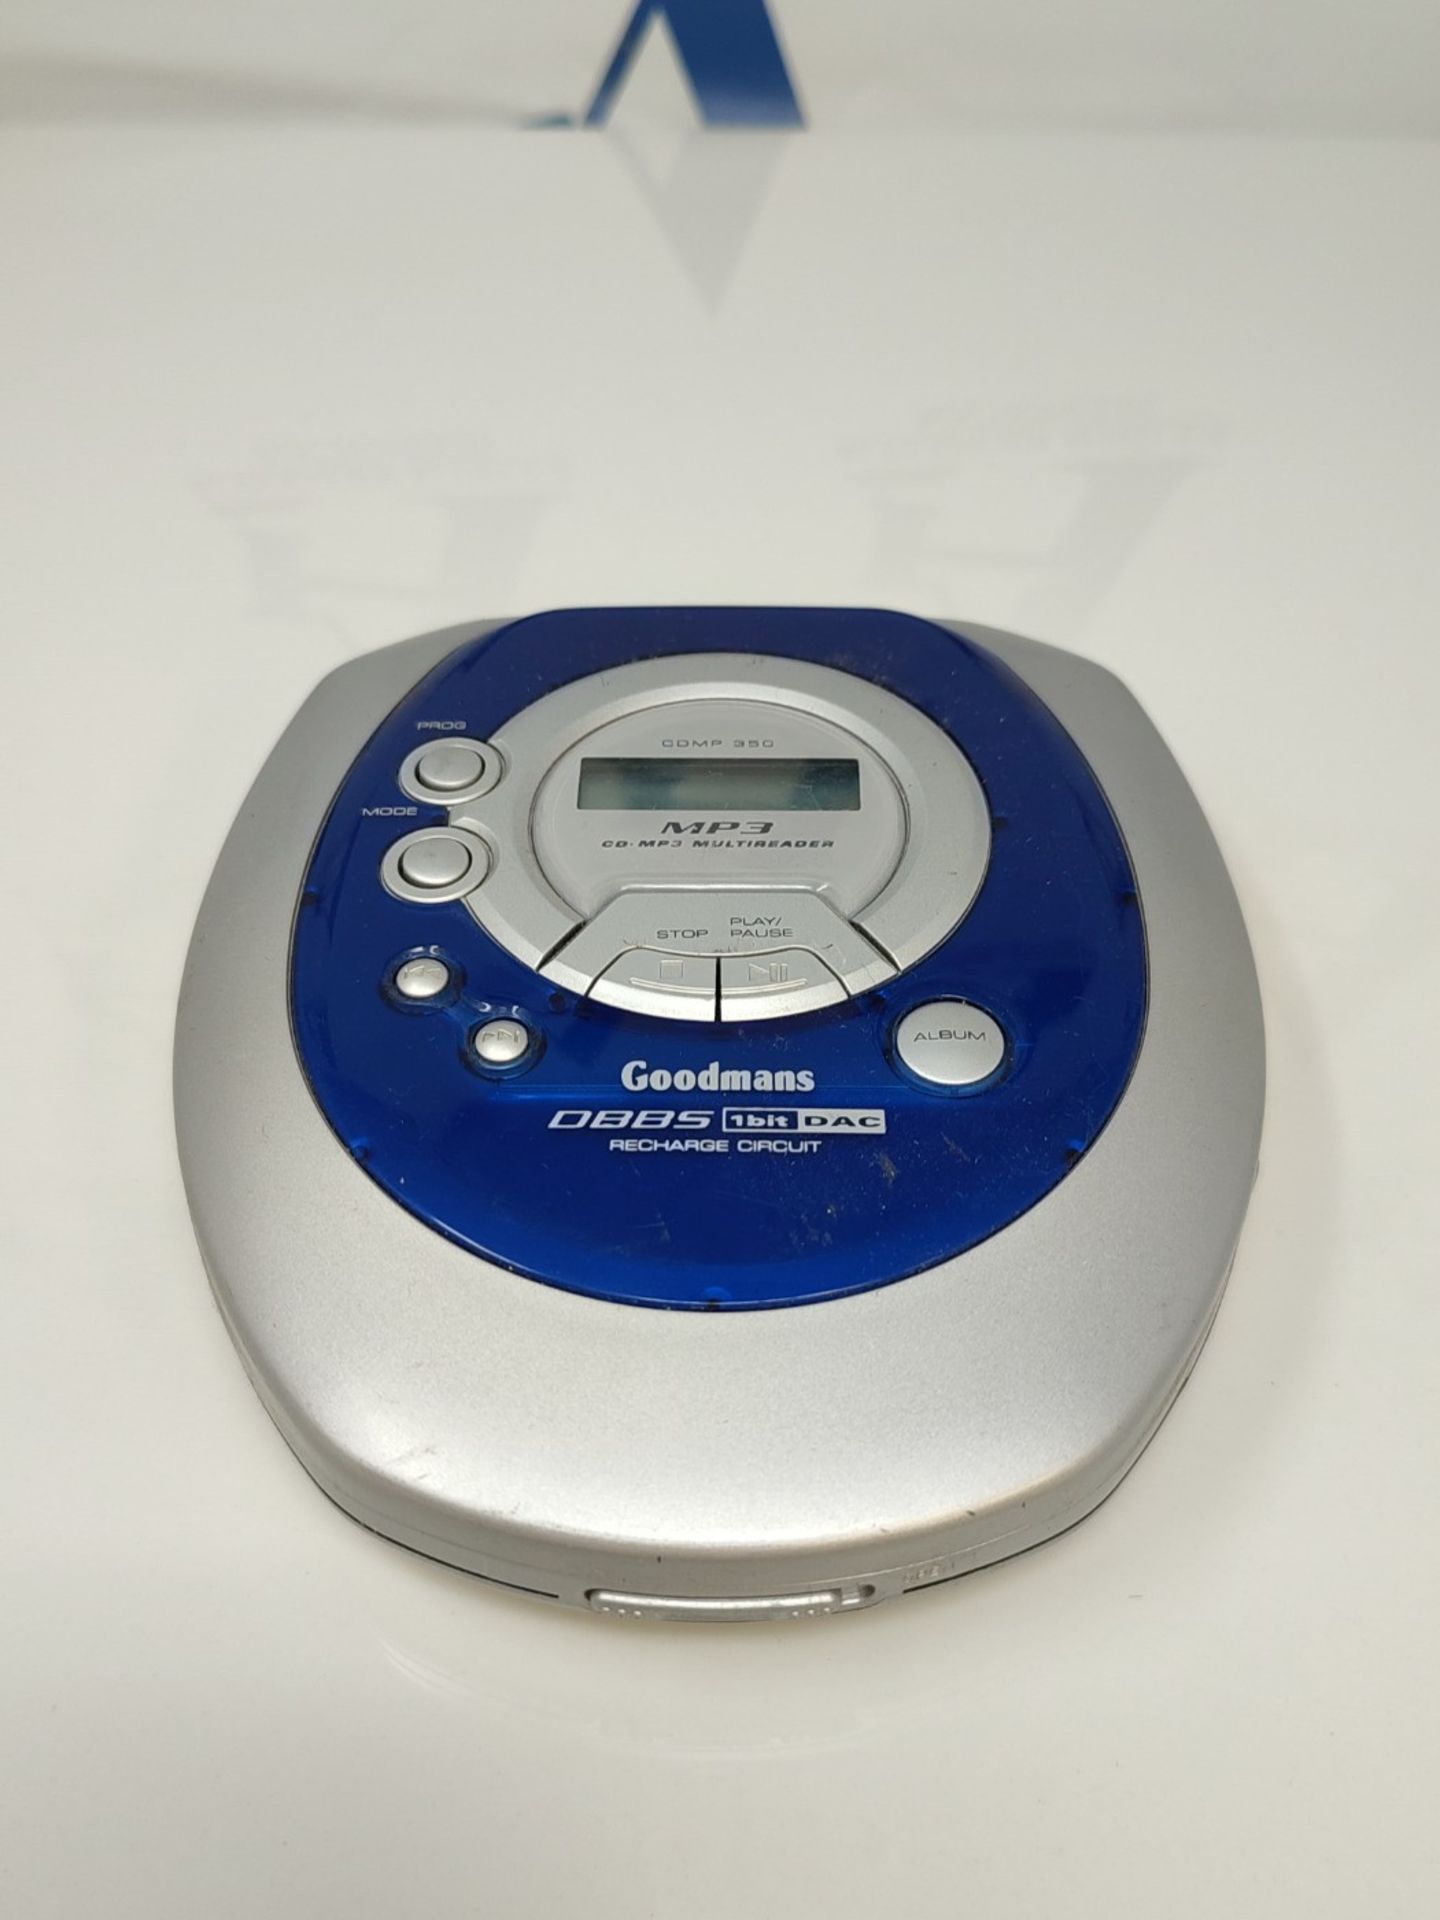 Goodmans CDMP350 Personal Compact Disc Player with build in Mp3 Reader - Image 2 of 3